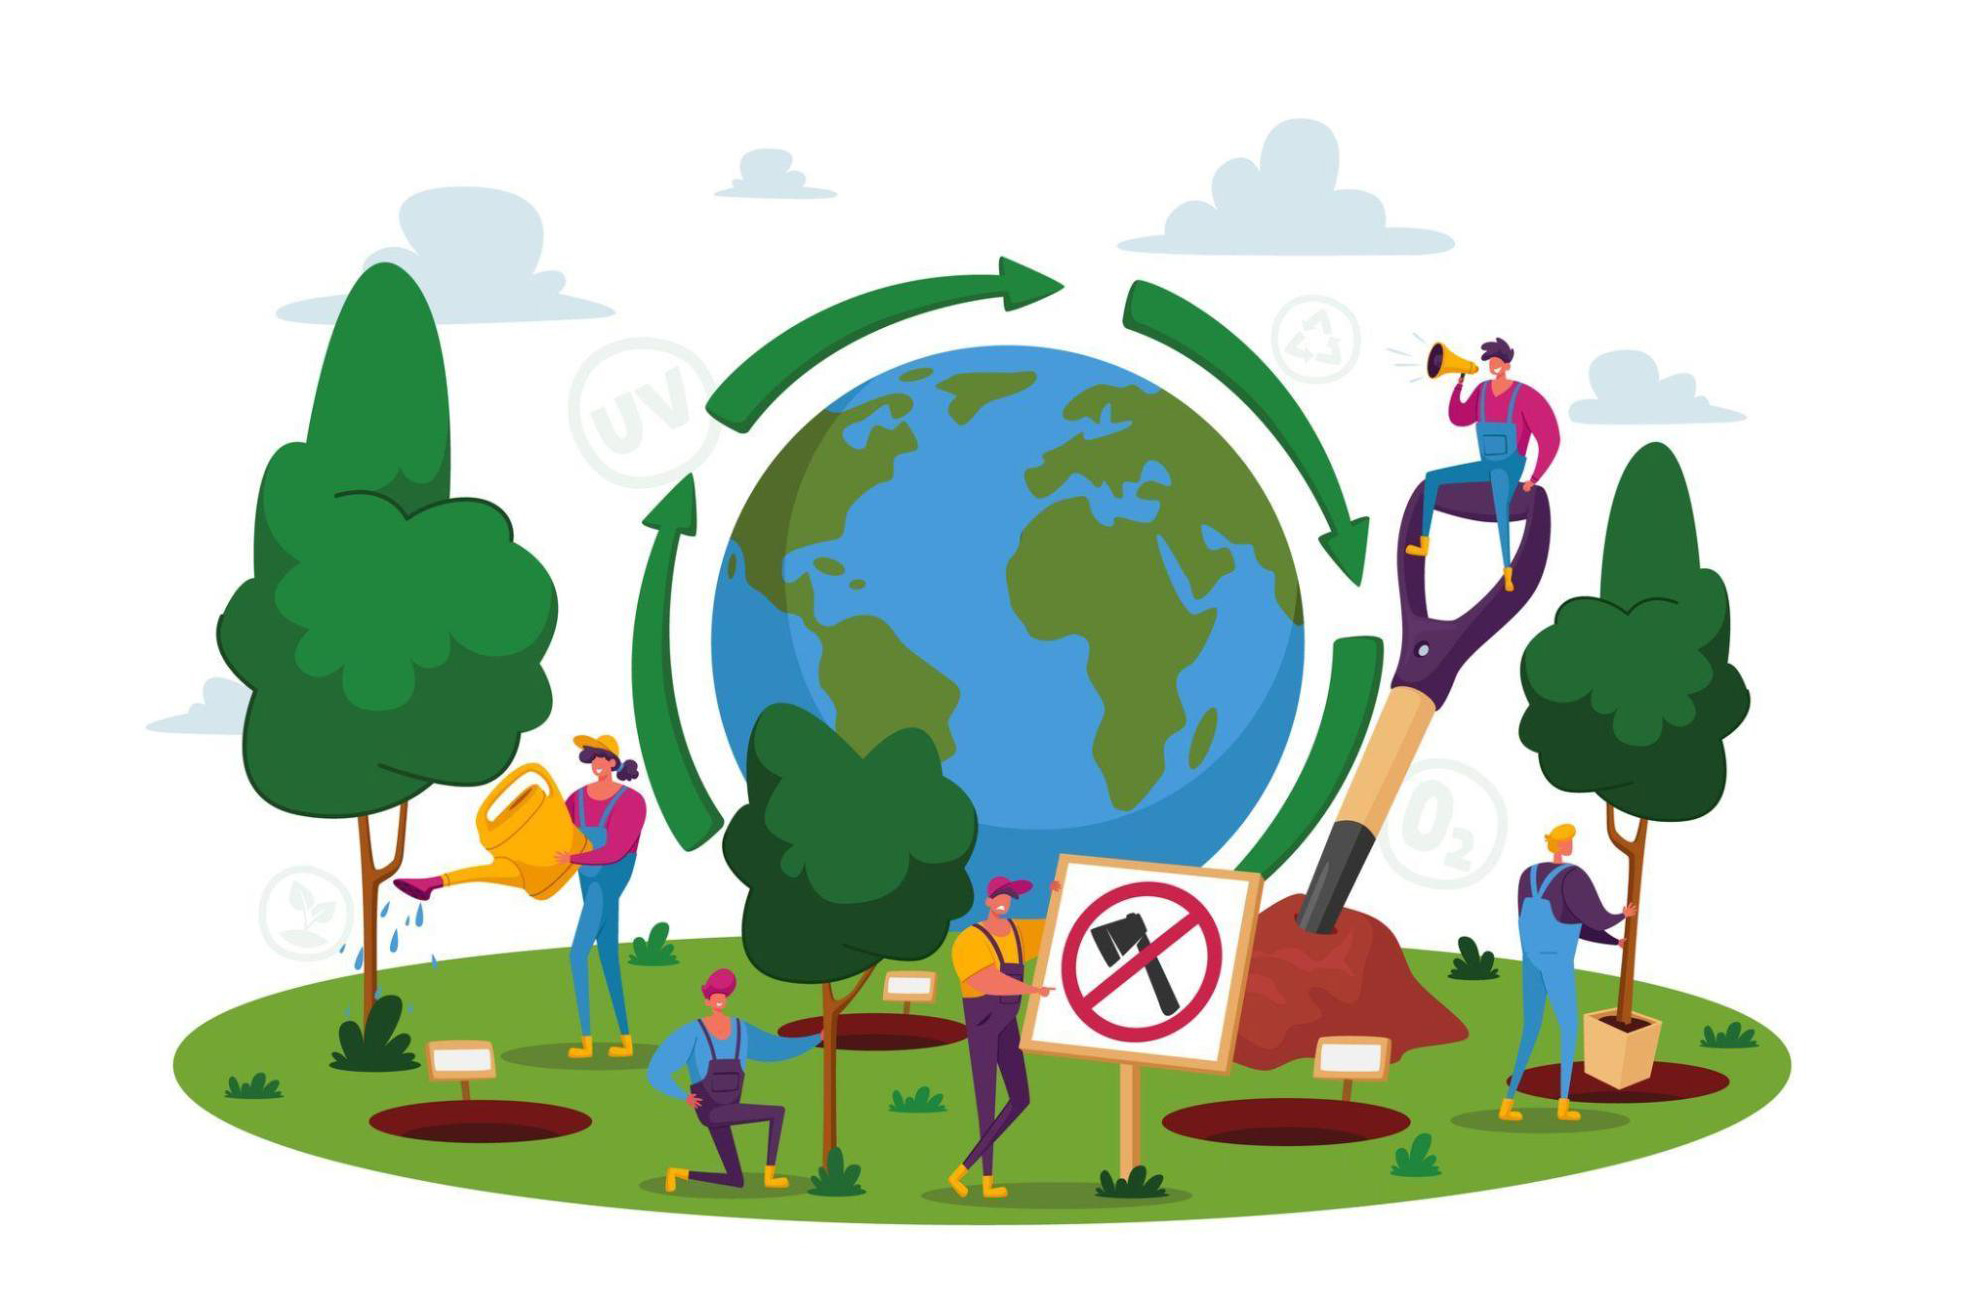 Illustration of a community working together to protect the environment